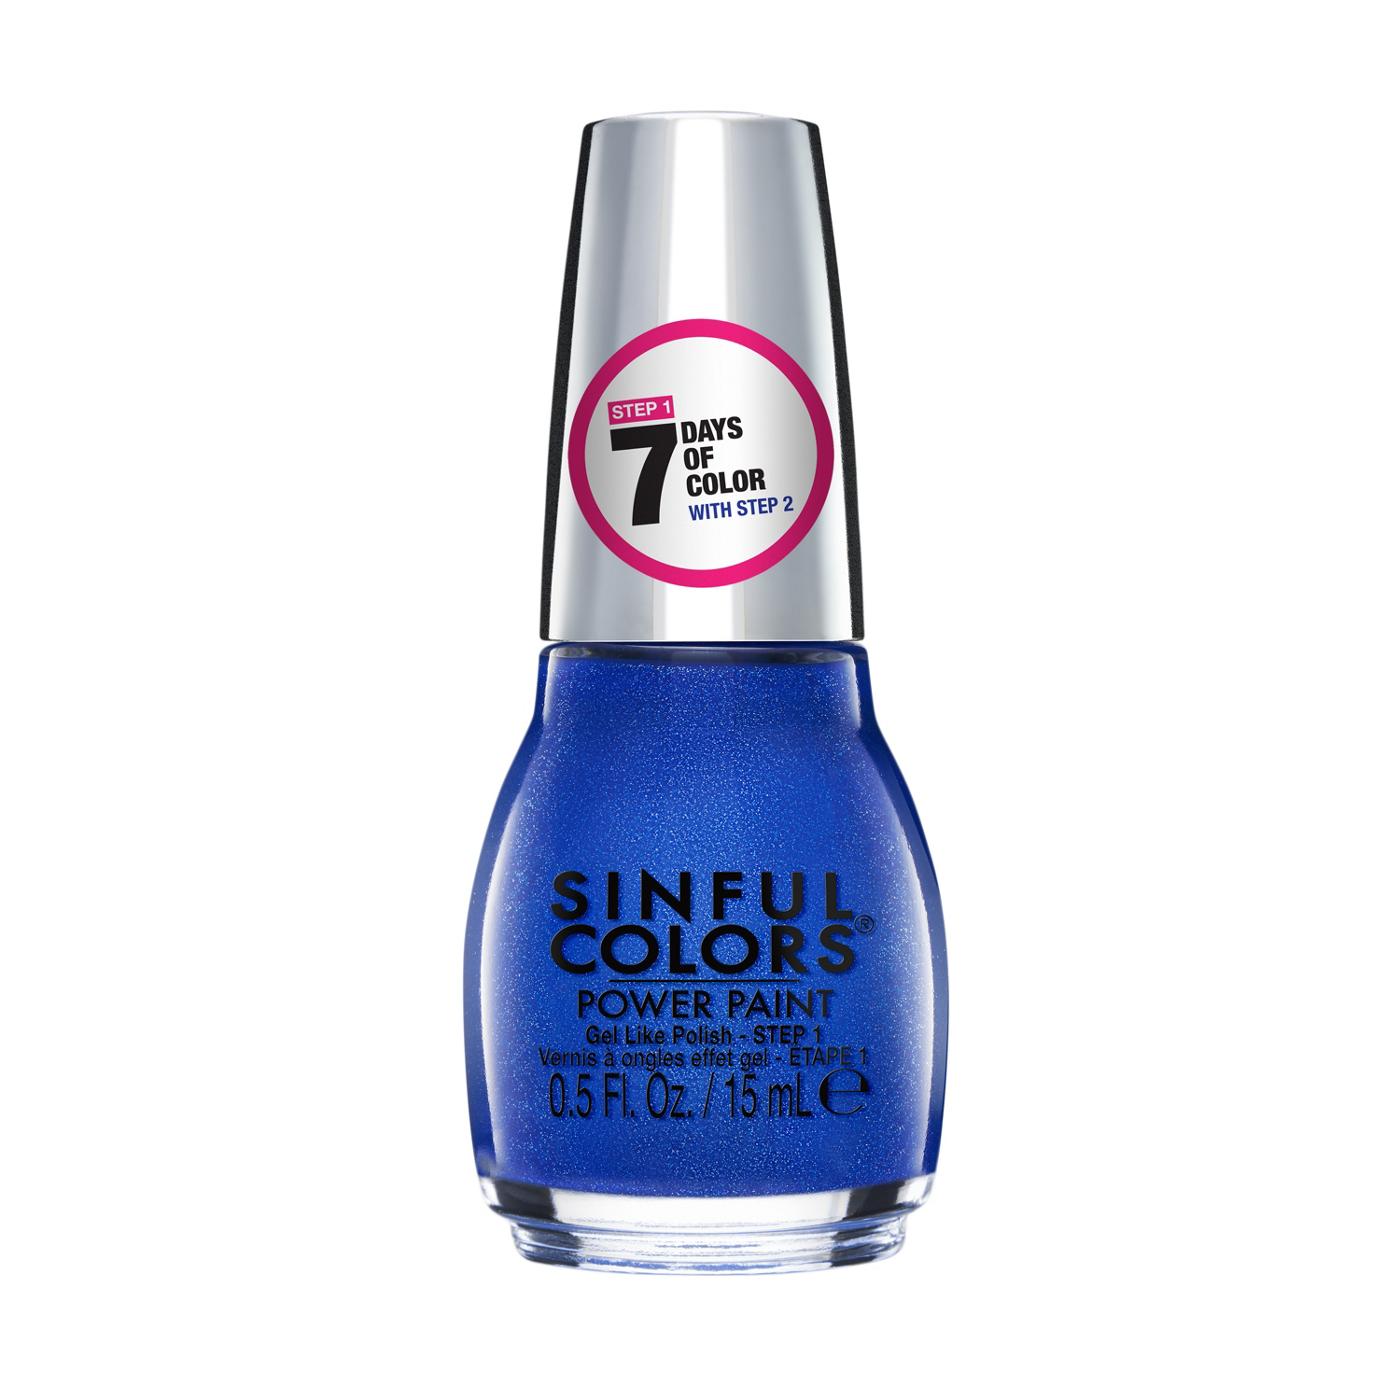 Sinful Colors Power Paint Nail Polish - Pop it; image 1 of 2